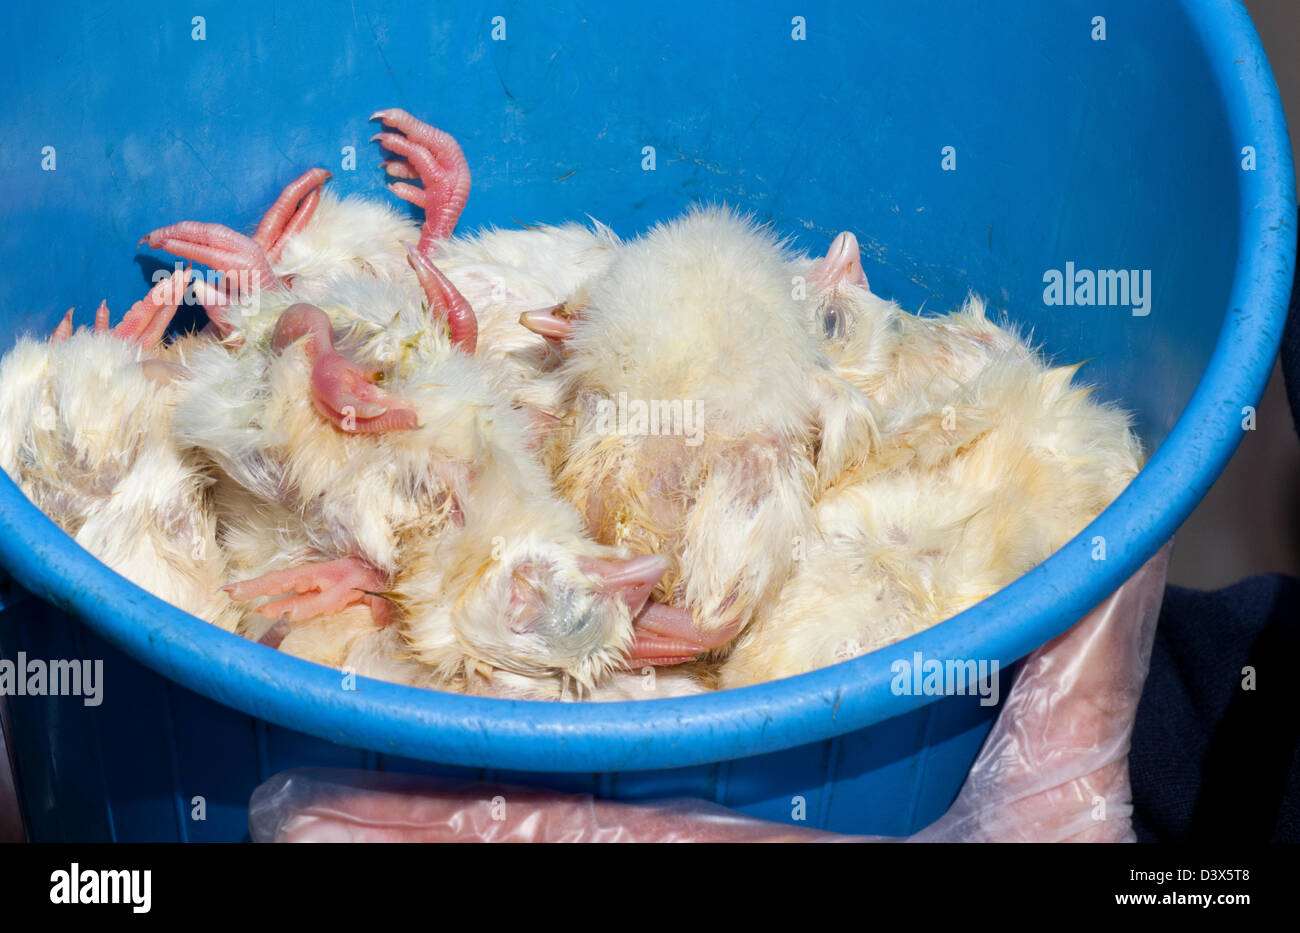 A bucket of dead chicks (Animal feed) Stock Photo